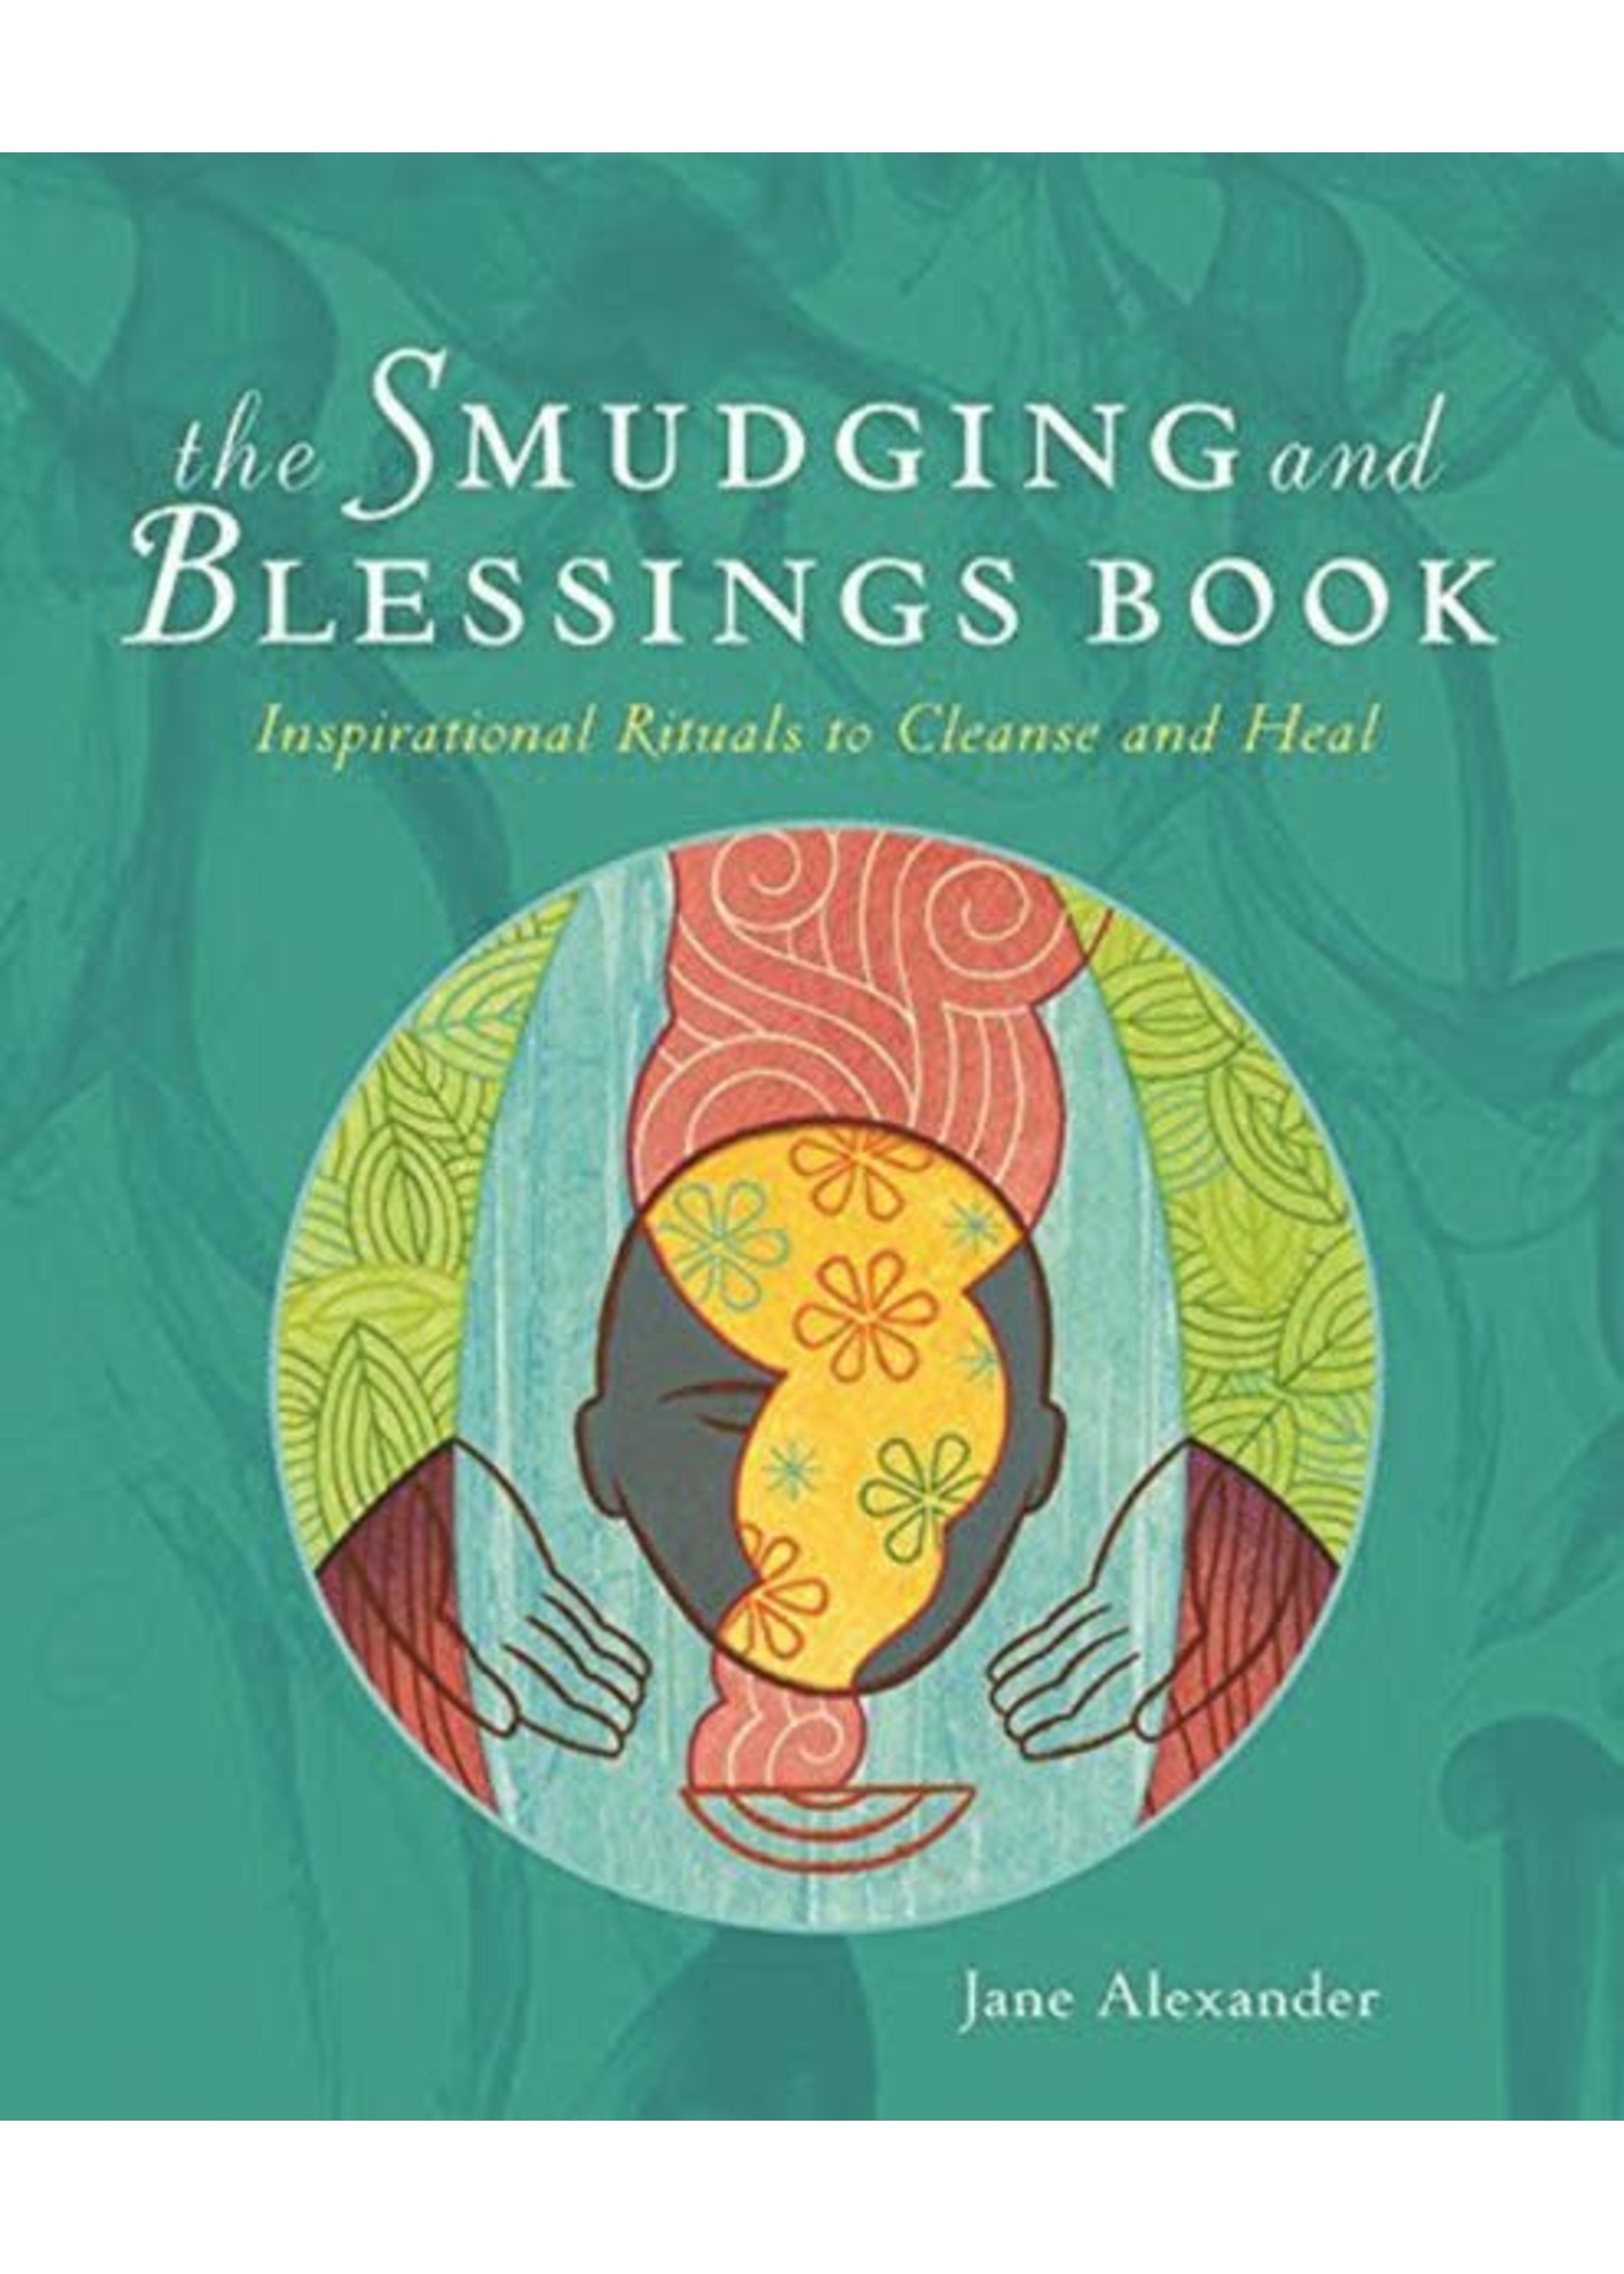 Smudging and Blessings Book Inspirational Rituals to Cleanse and Heal